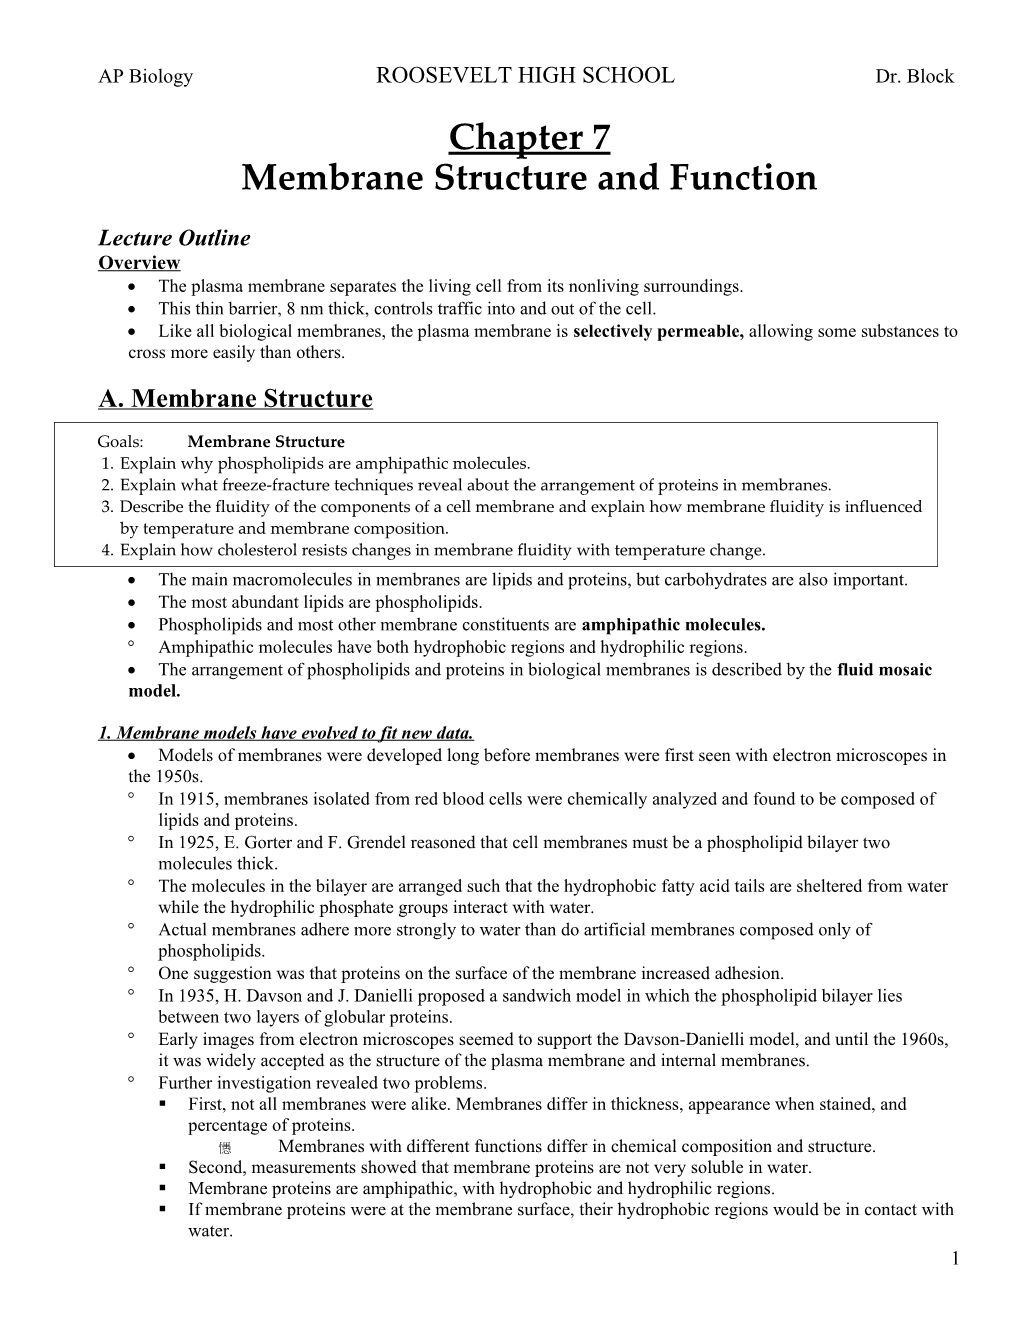 Chapter 8 Membrane Stucture and Function s1